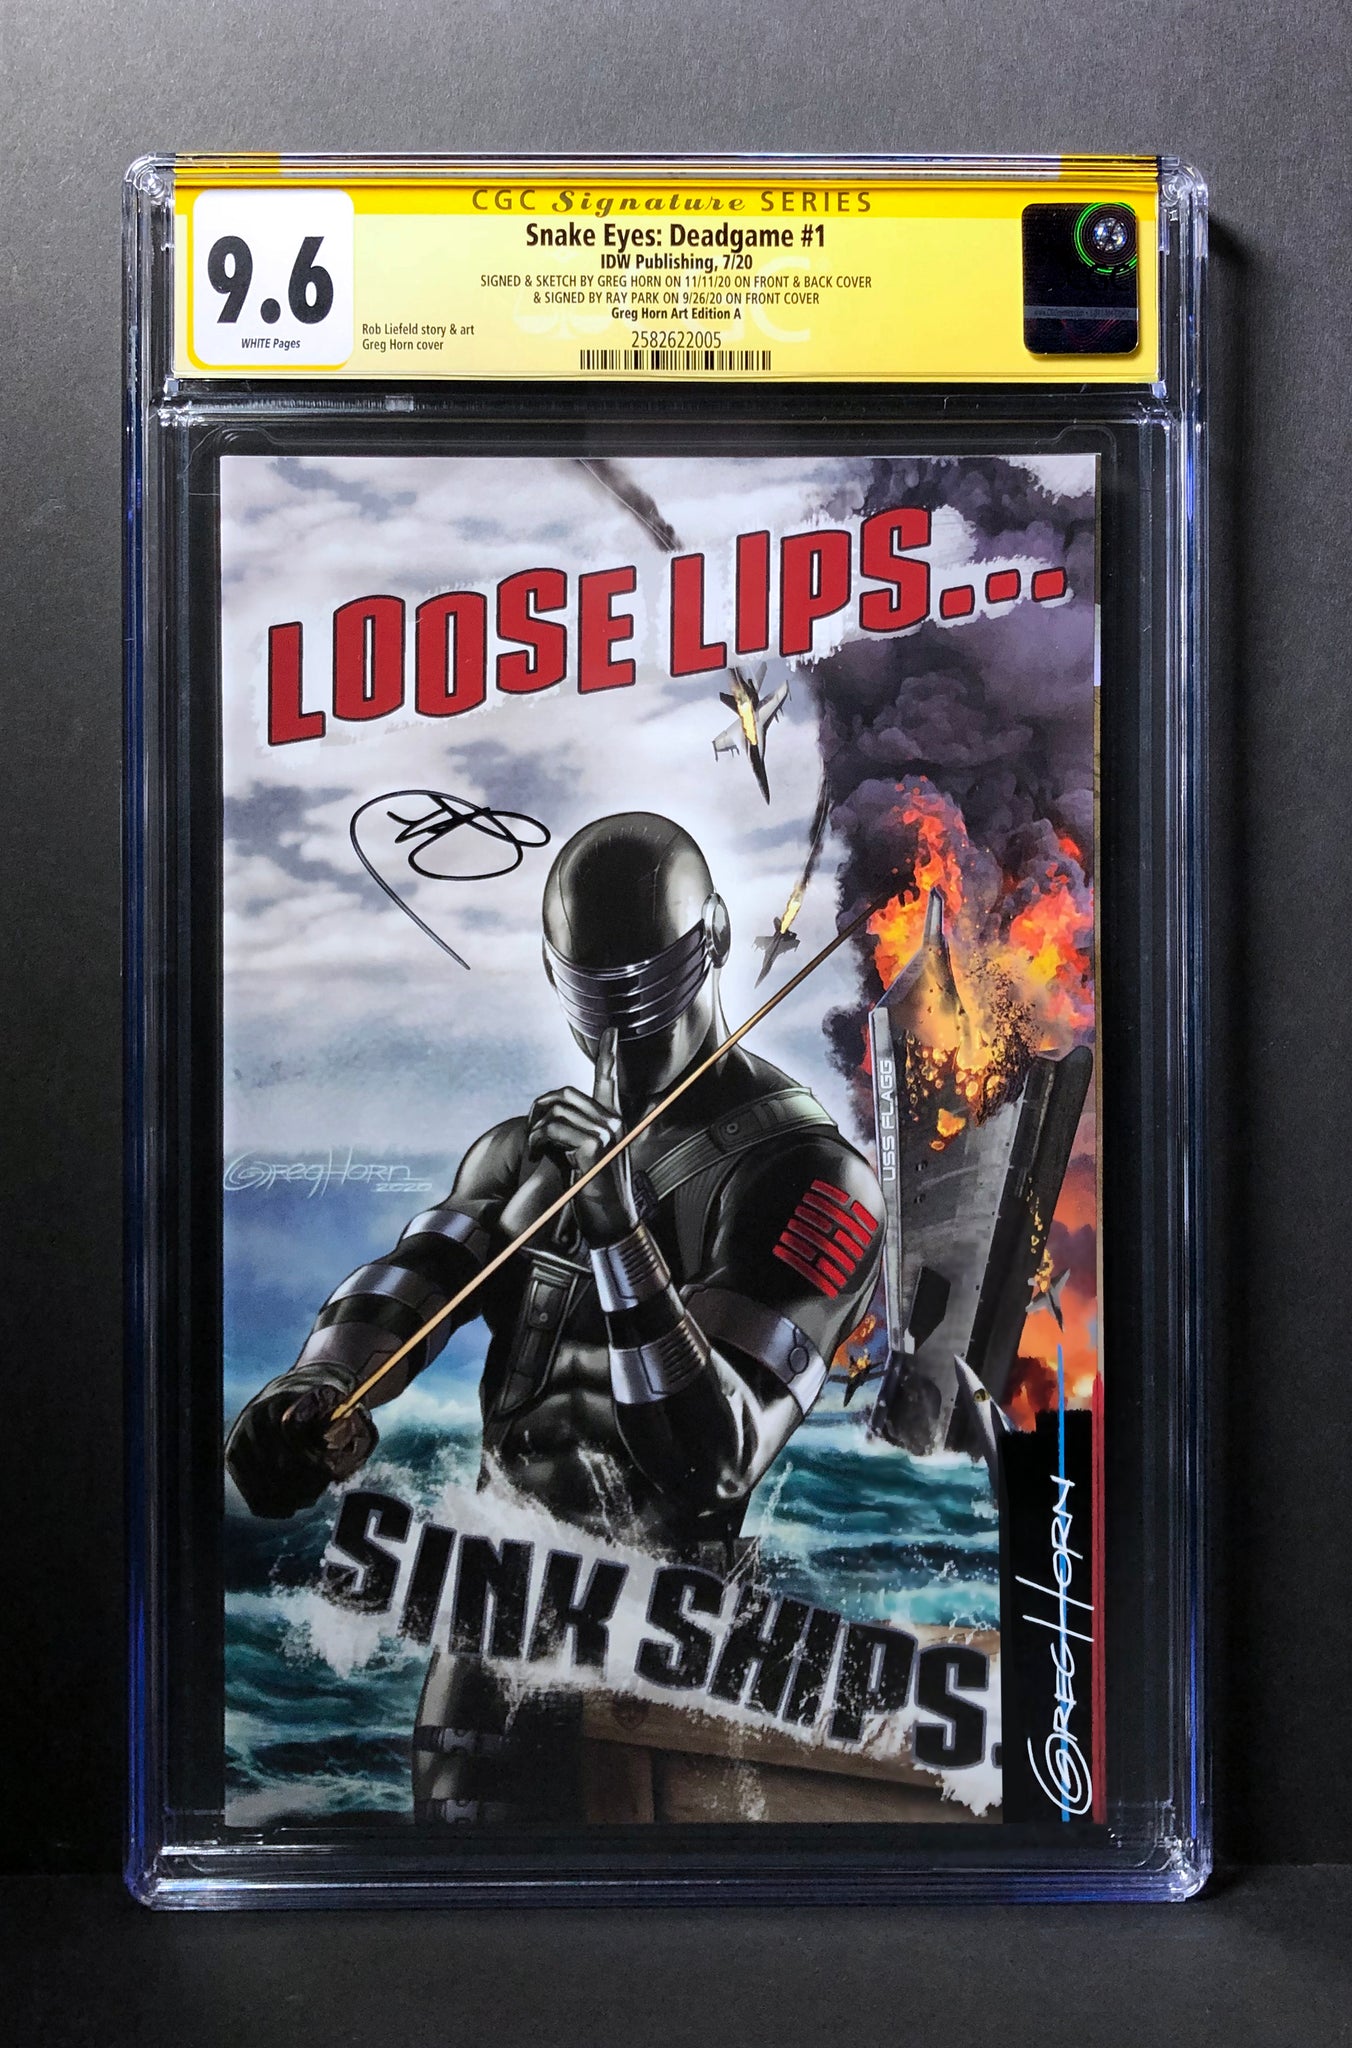 Snake Eyes Deadgame # 1 CGC Signature Series - Signed by Ray Park & Signed/Remarked by Greg Horn